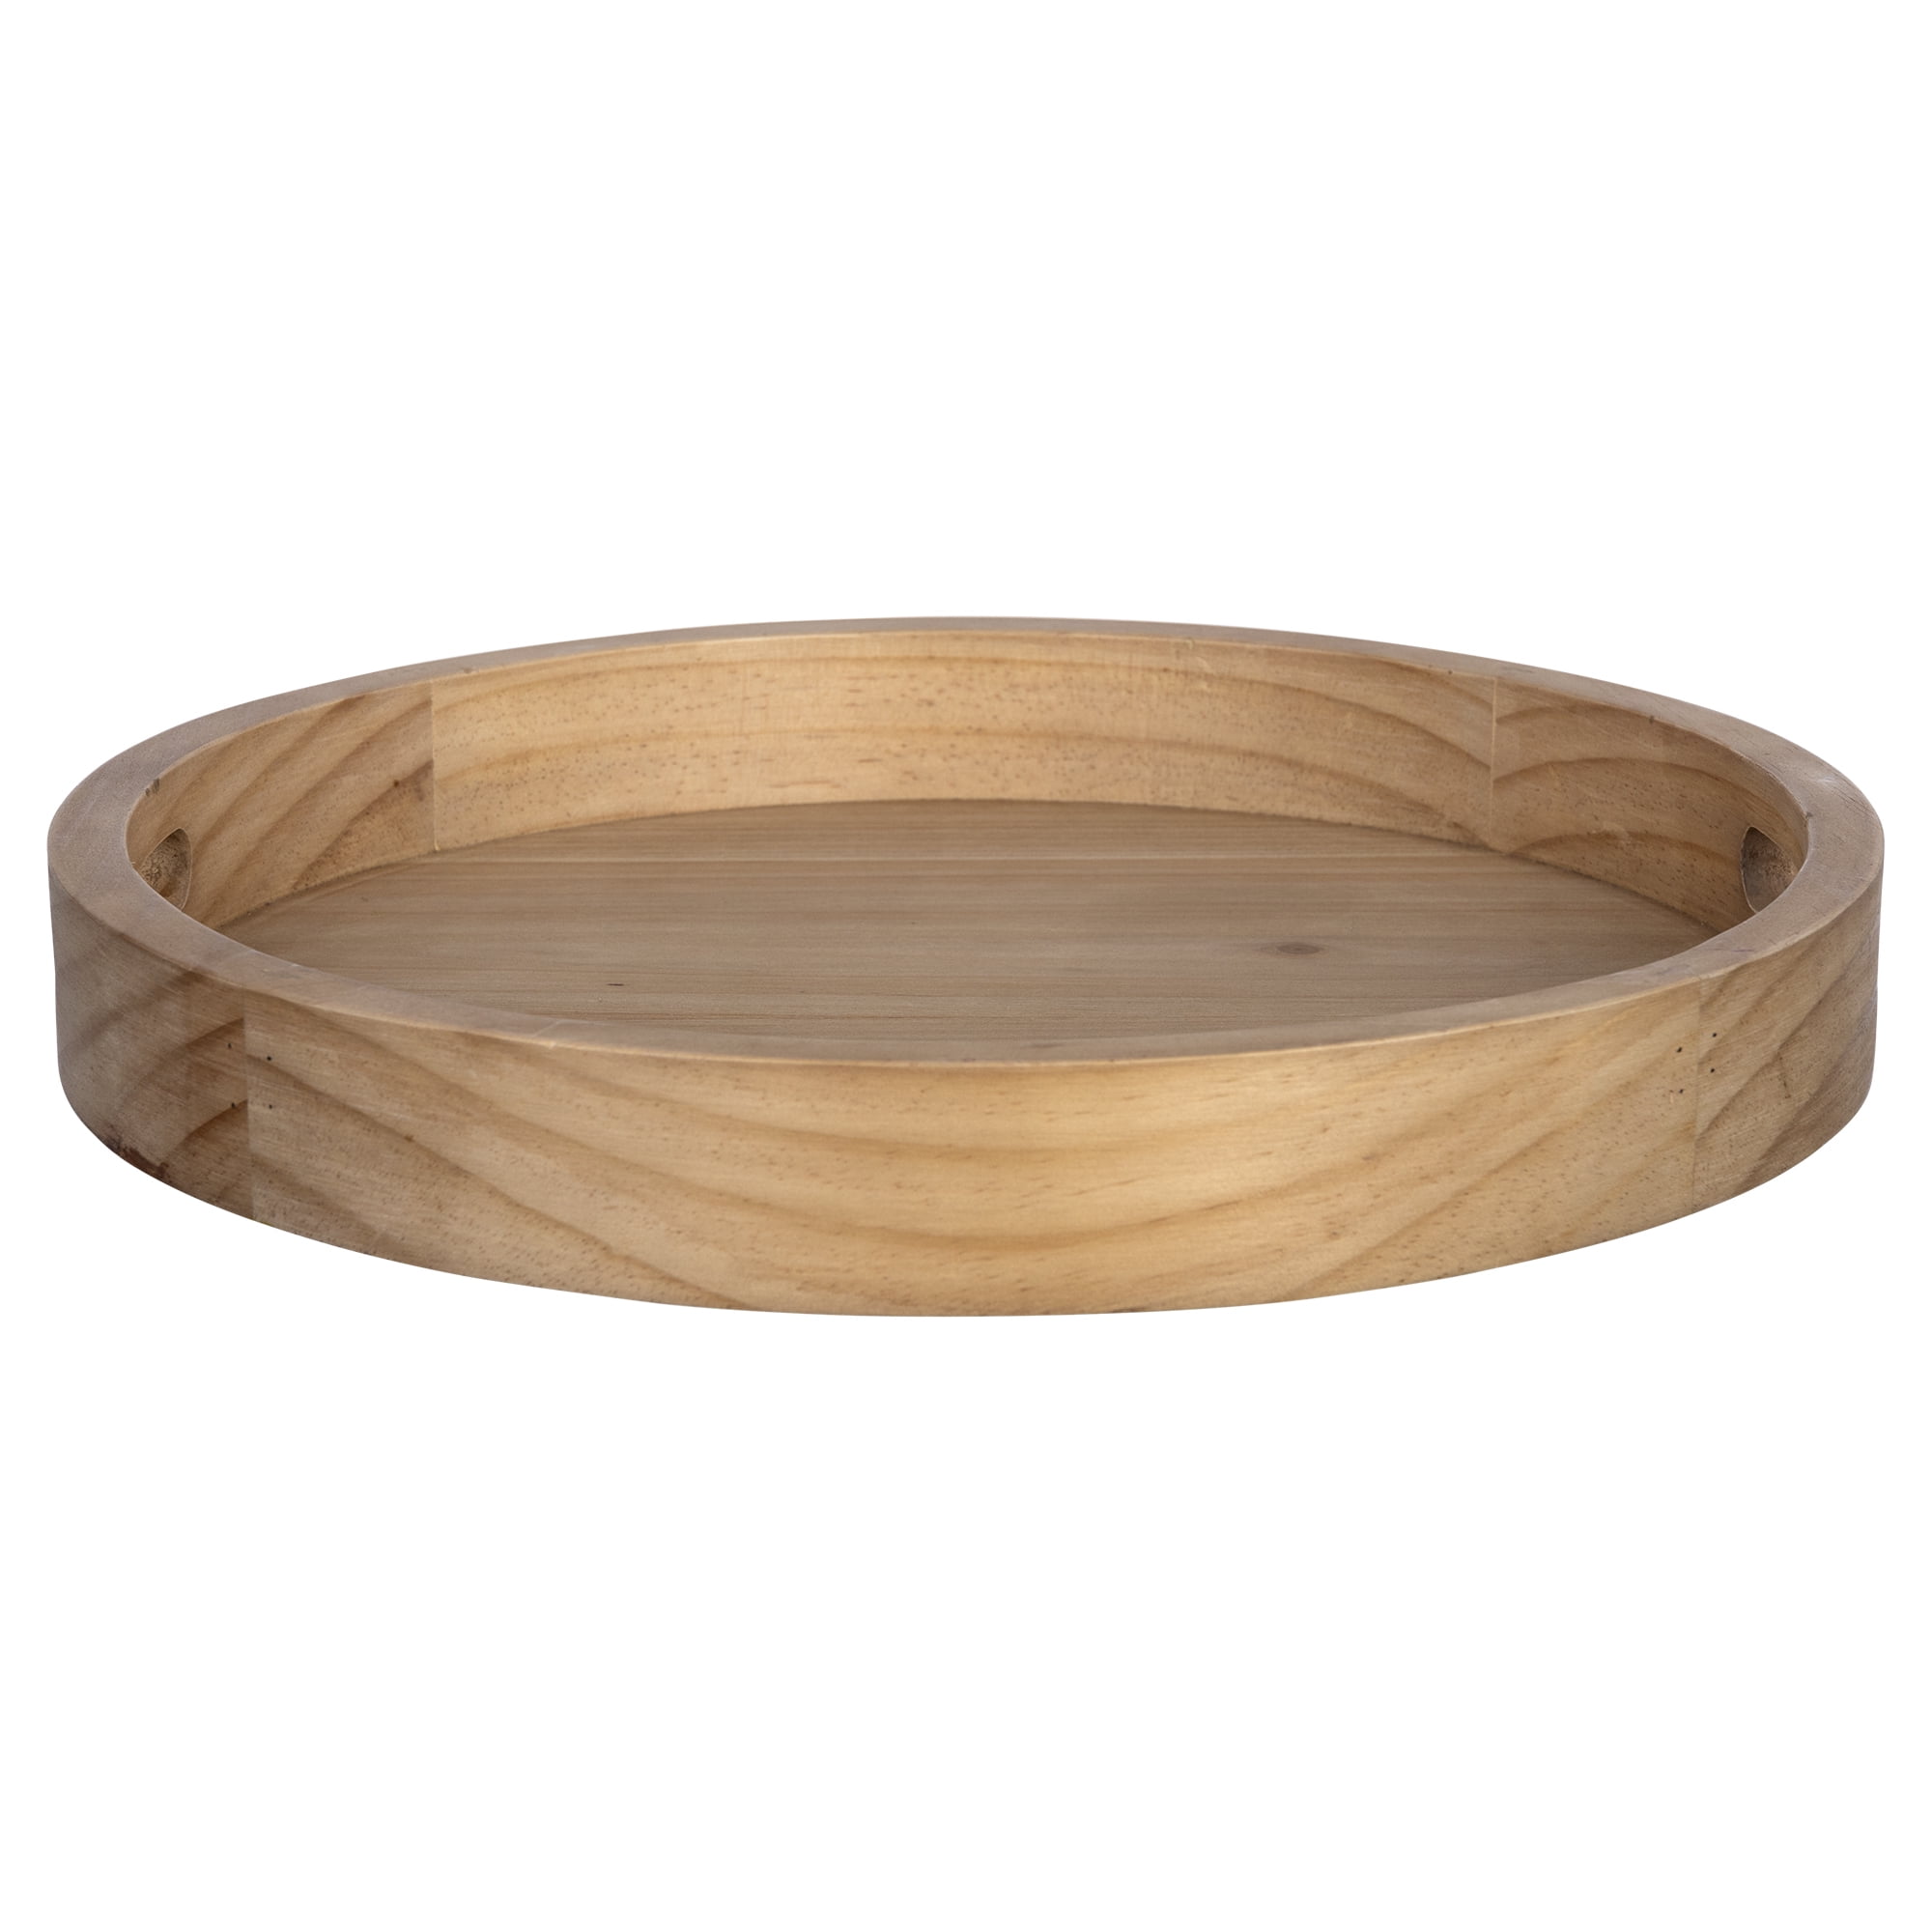 Stratton Home Decor Boho Round Natural, Round Wooden Tray With Handles Uk